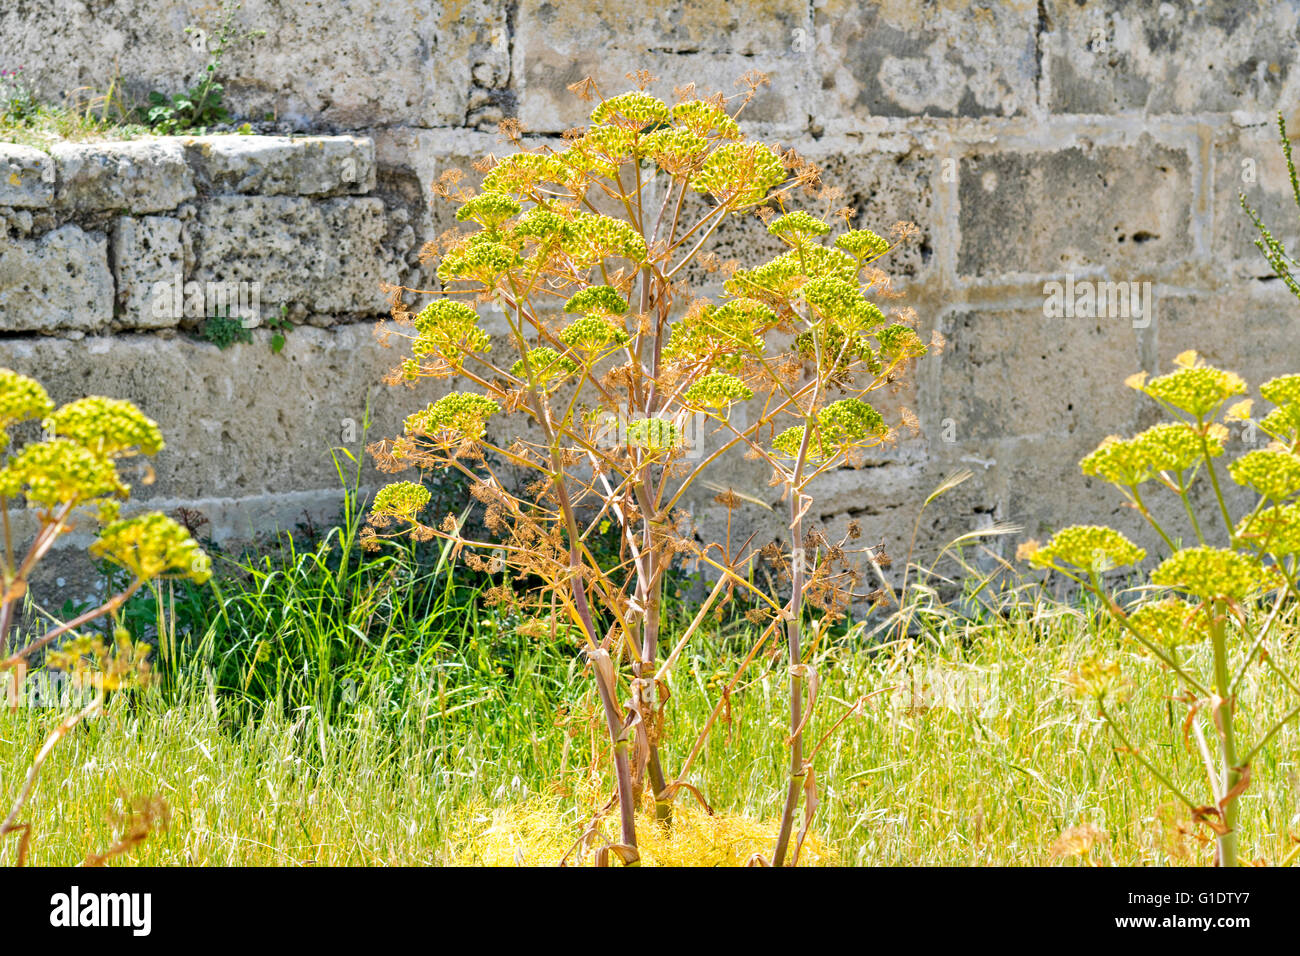 NORTH CYPRUS WILD FENNEL WITH SEED HEADS GROWING AGAINST A CASTLE WALL Stock Photo